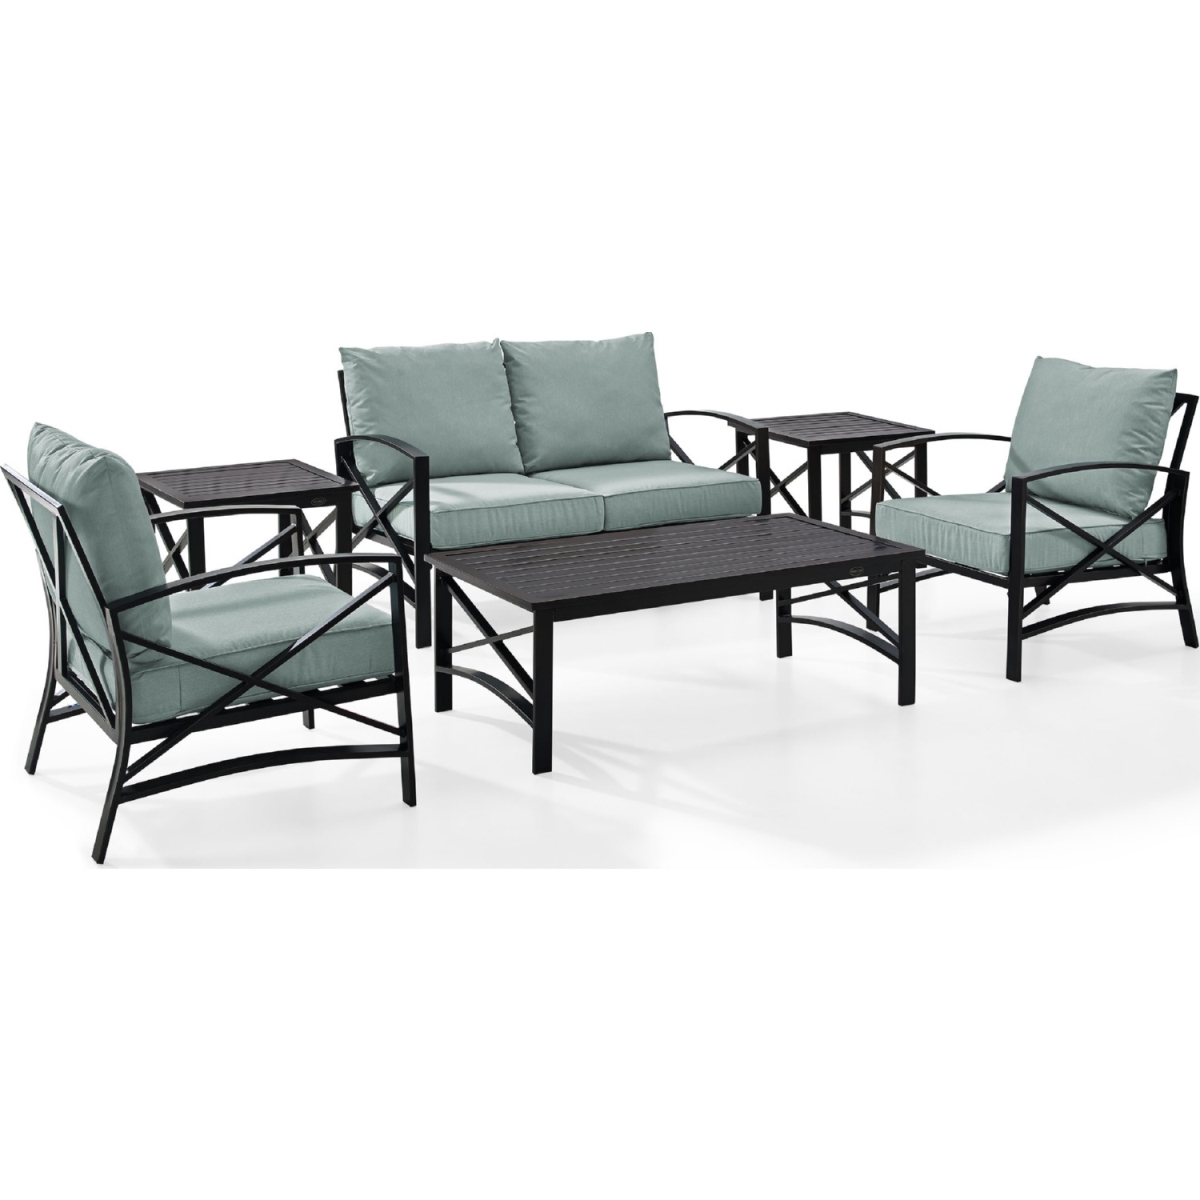 Ko60017bz-mi 6 Piece Kaplan Outdoor Seating Set With Mist Cushion - Loveseat, Two Chairs, Two Side Tables, Coffee Table